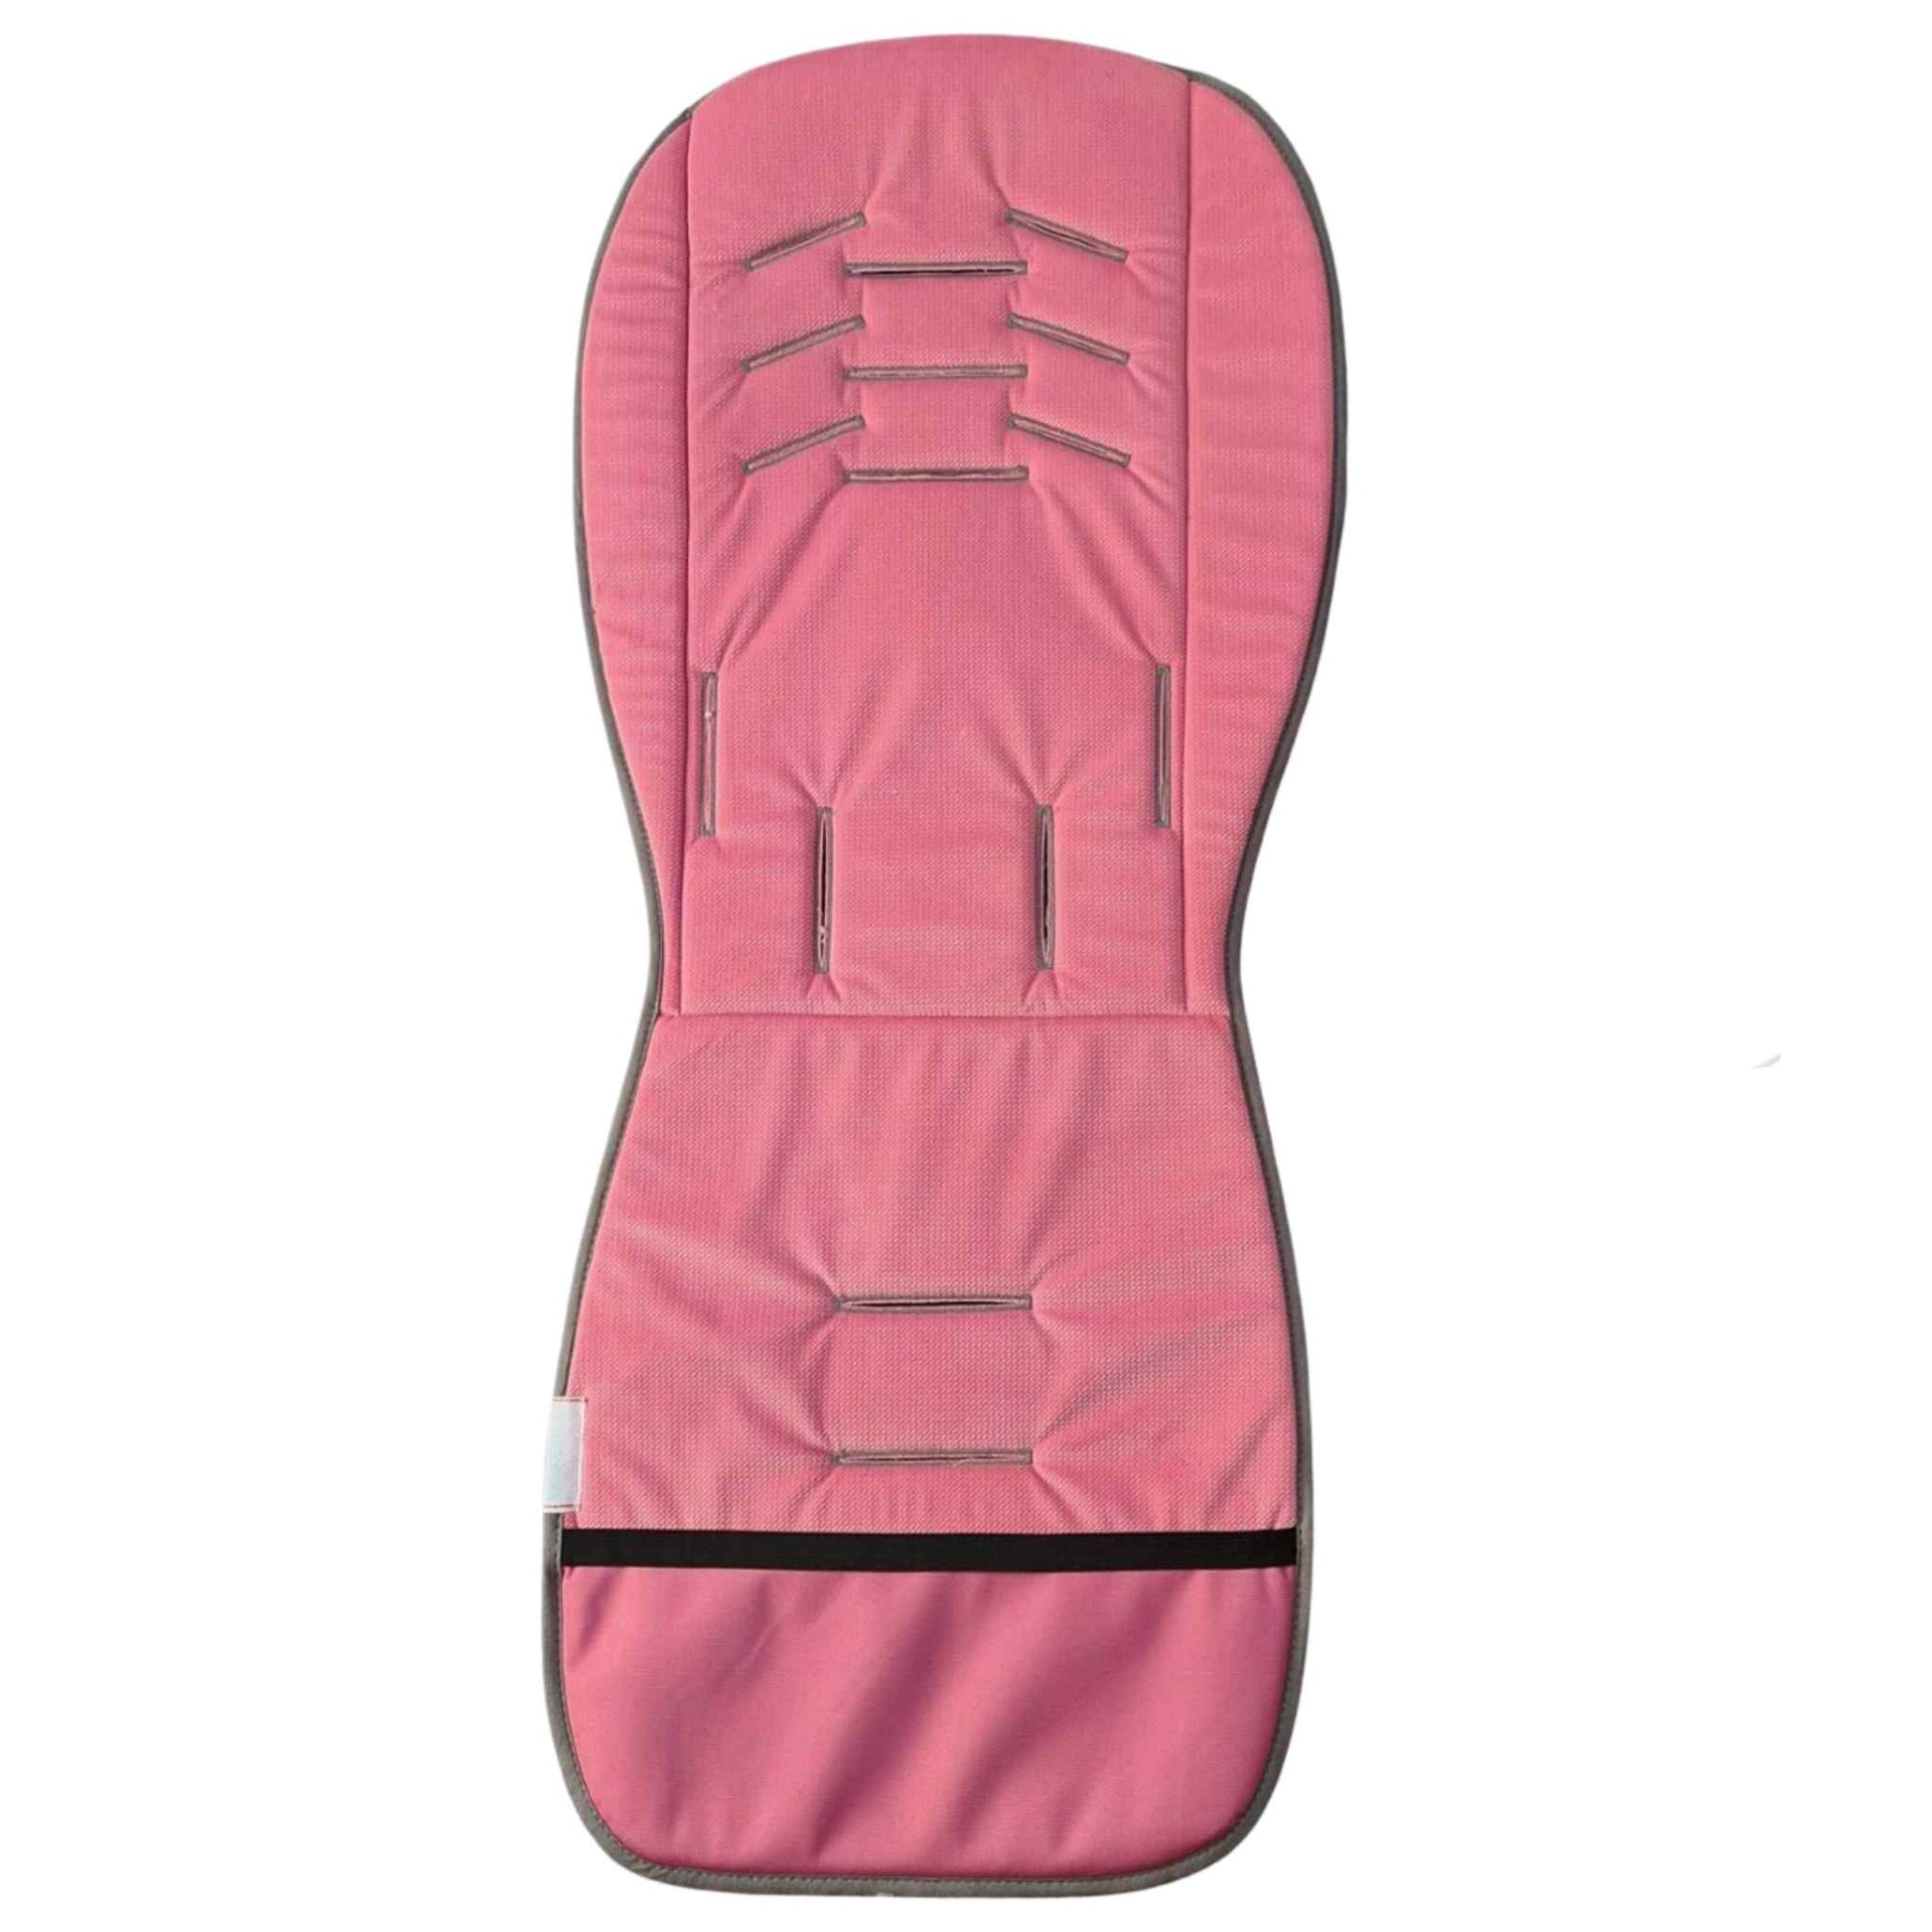 universal liner for pushchair strollers fits most strollers pink